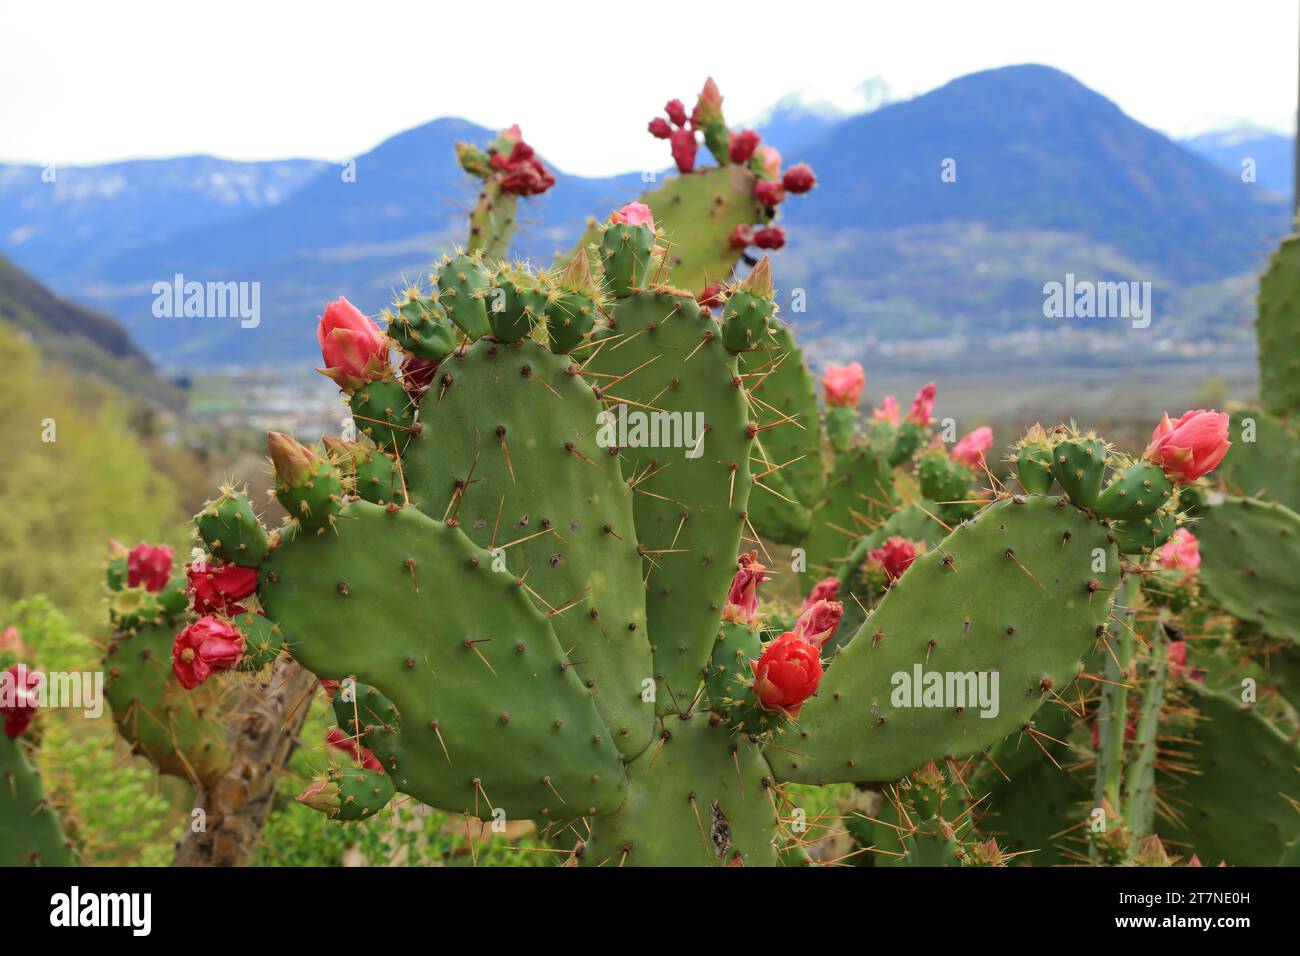 Opuntia ficus-indica cactus with tunas fruits and flowers Stock Photo